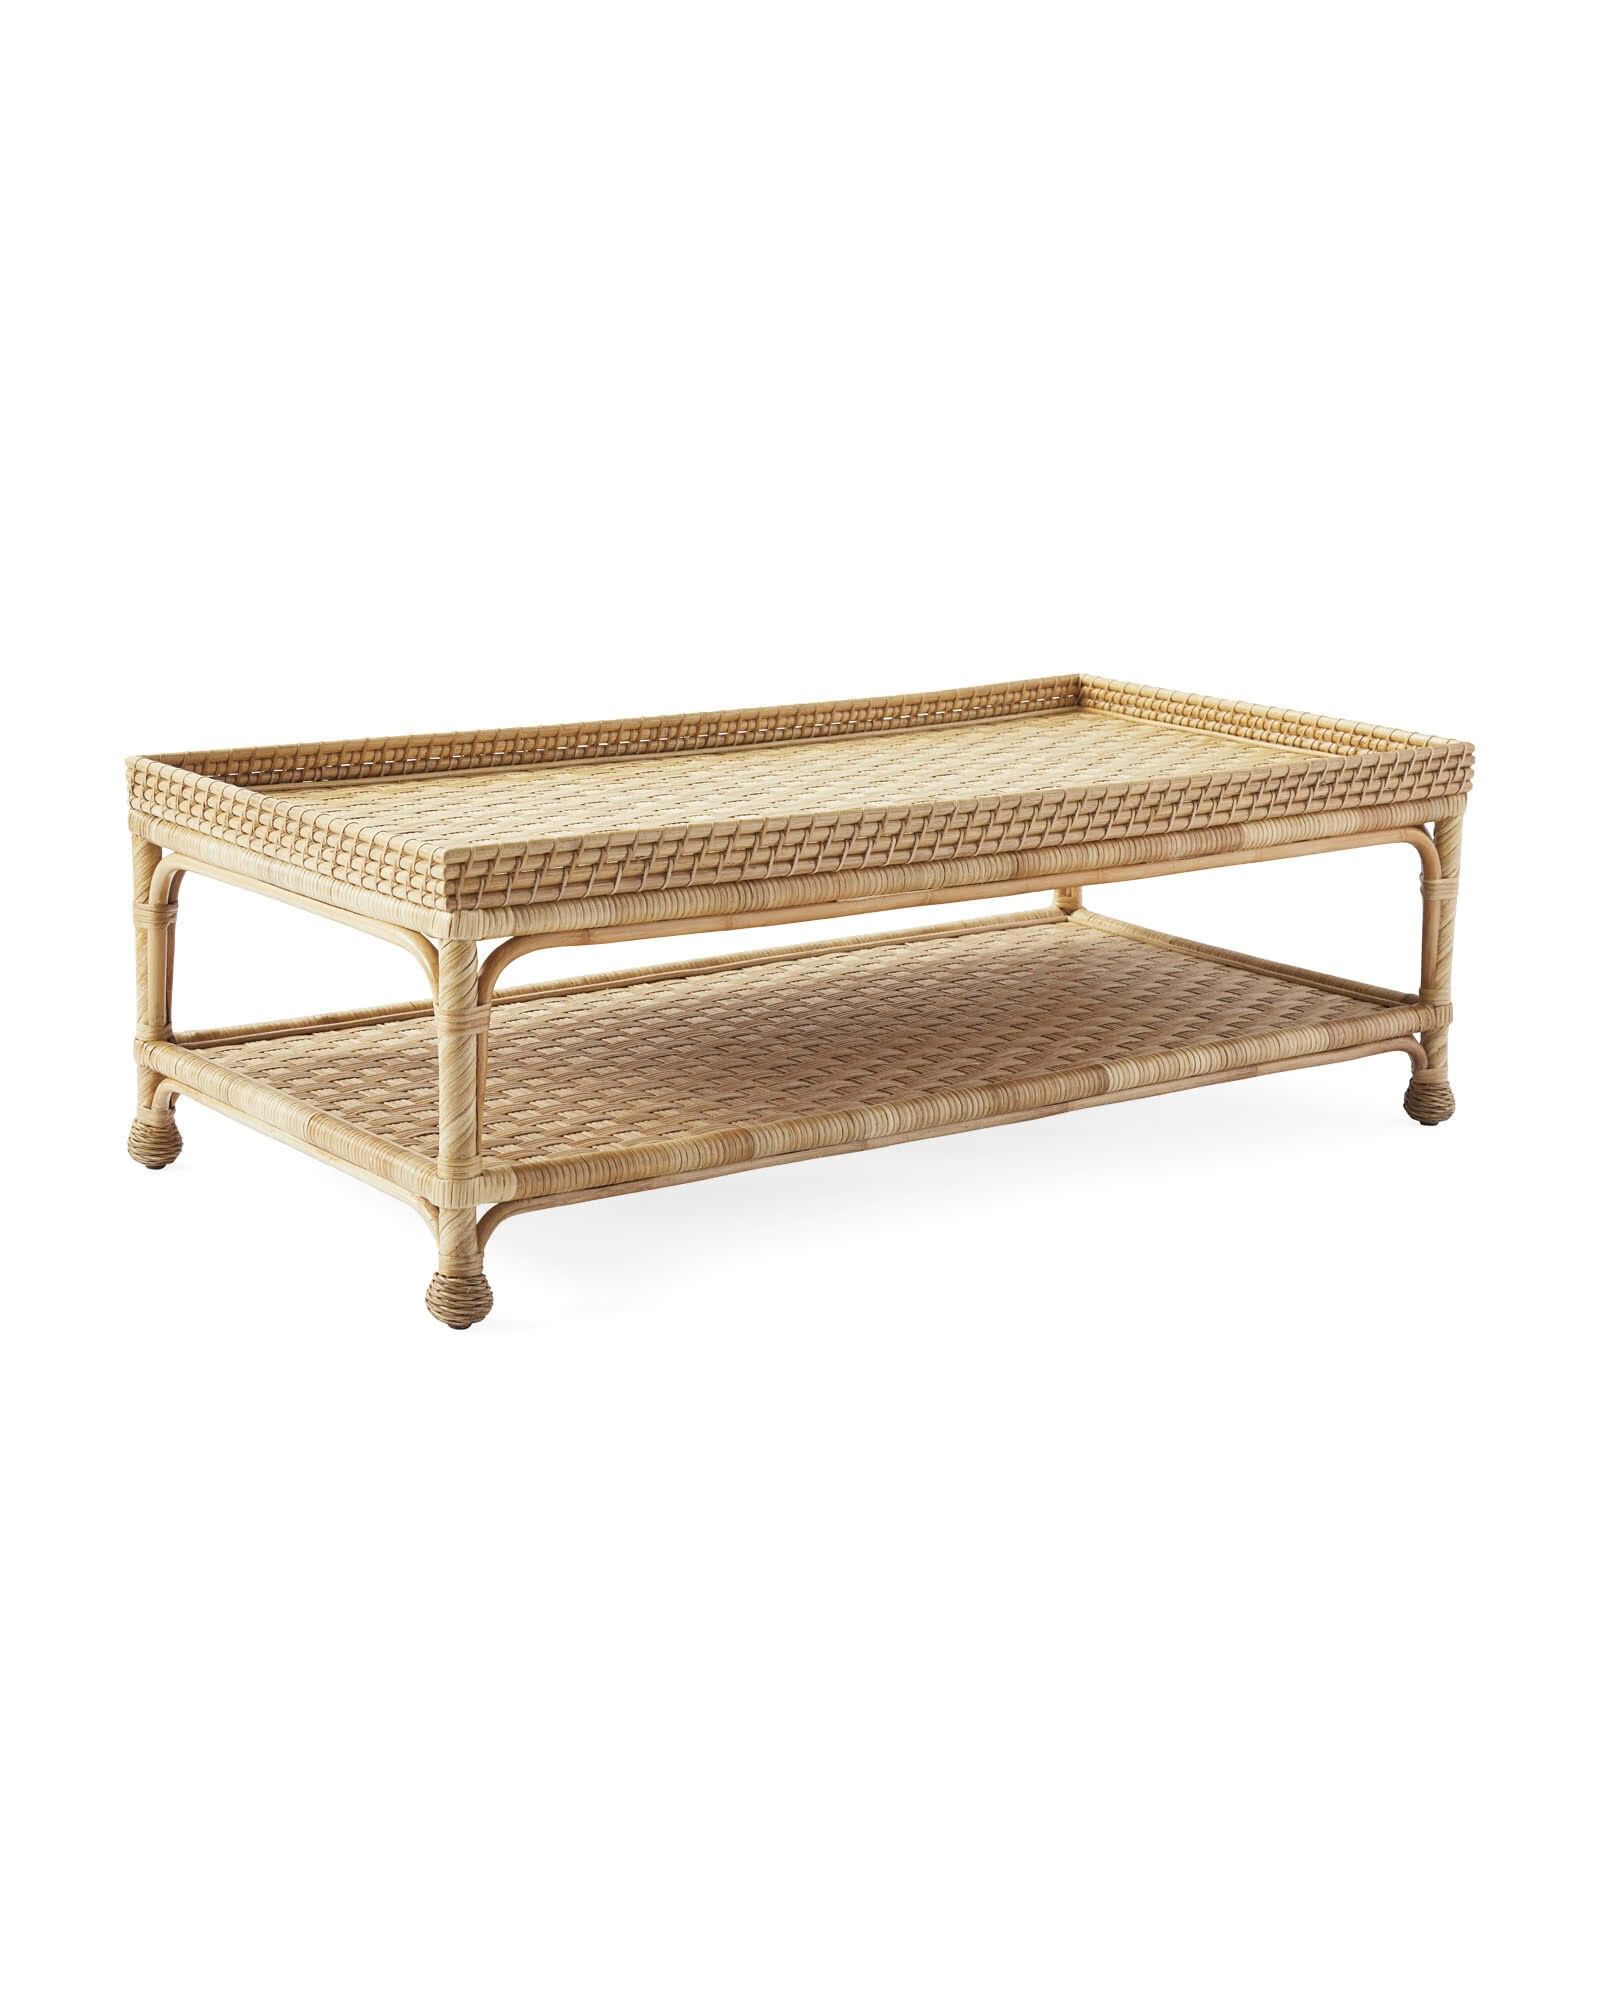 South Seas Coffee Table | Serena and Lily